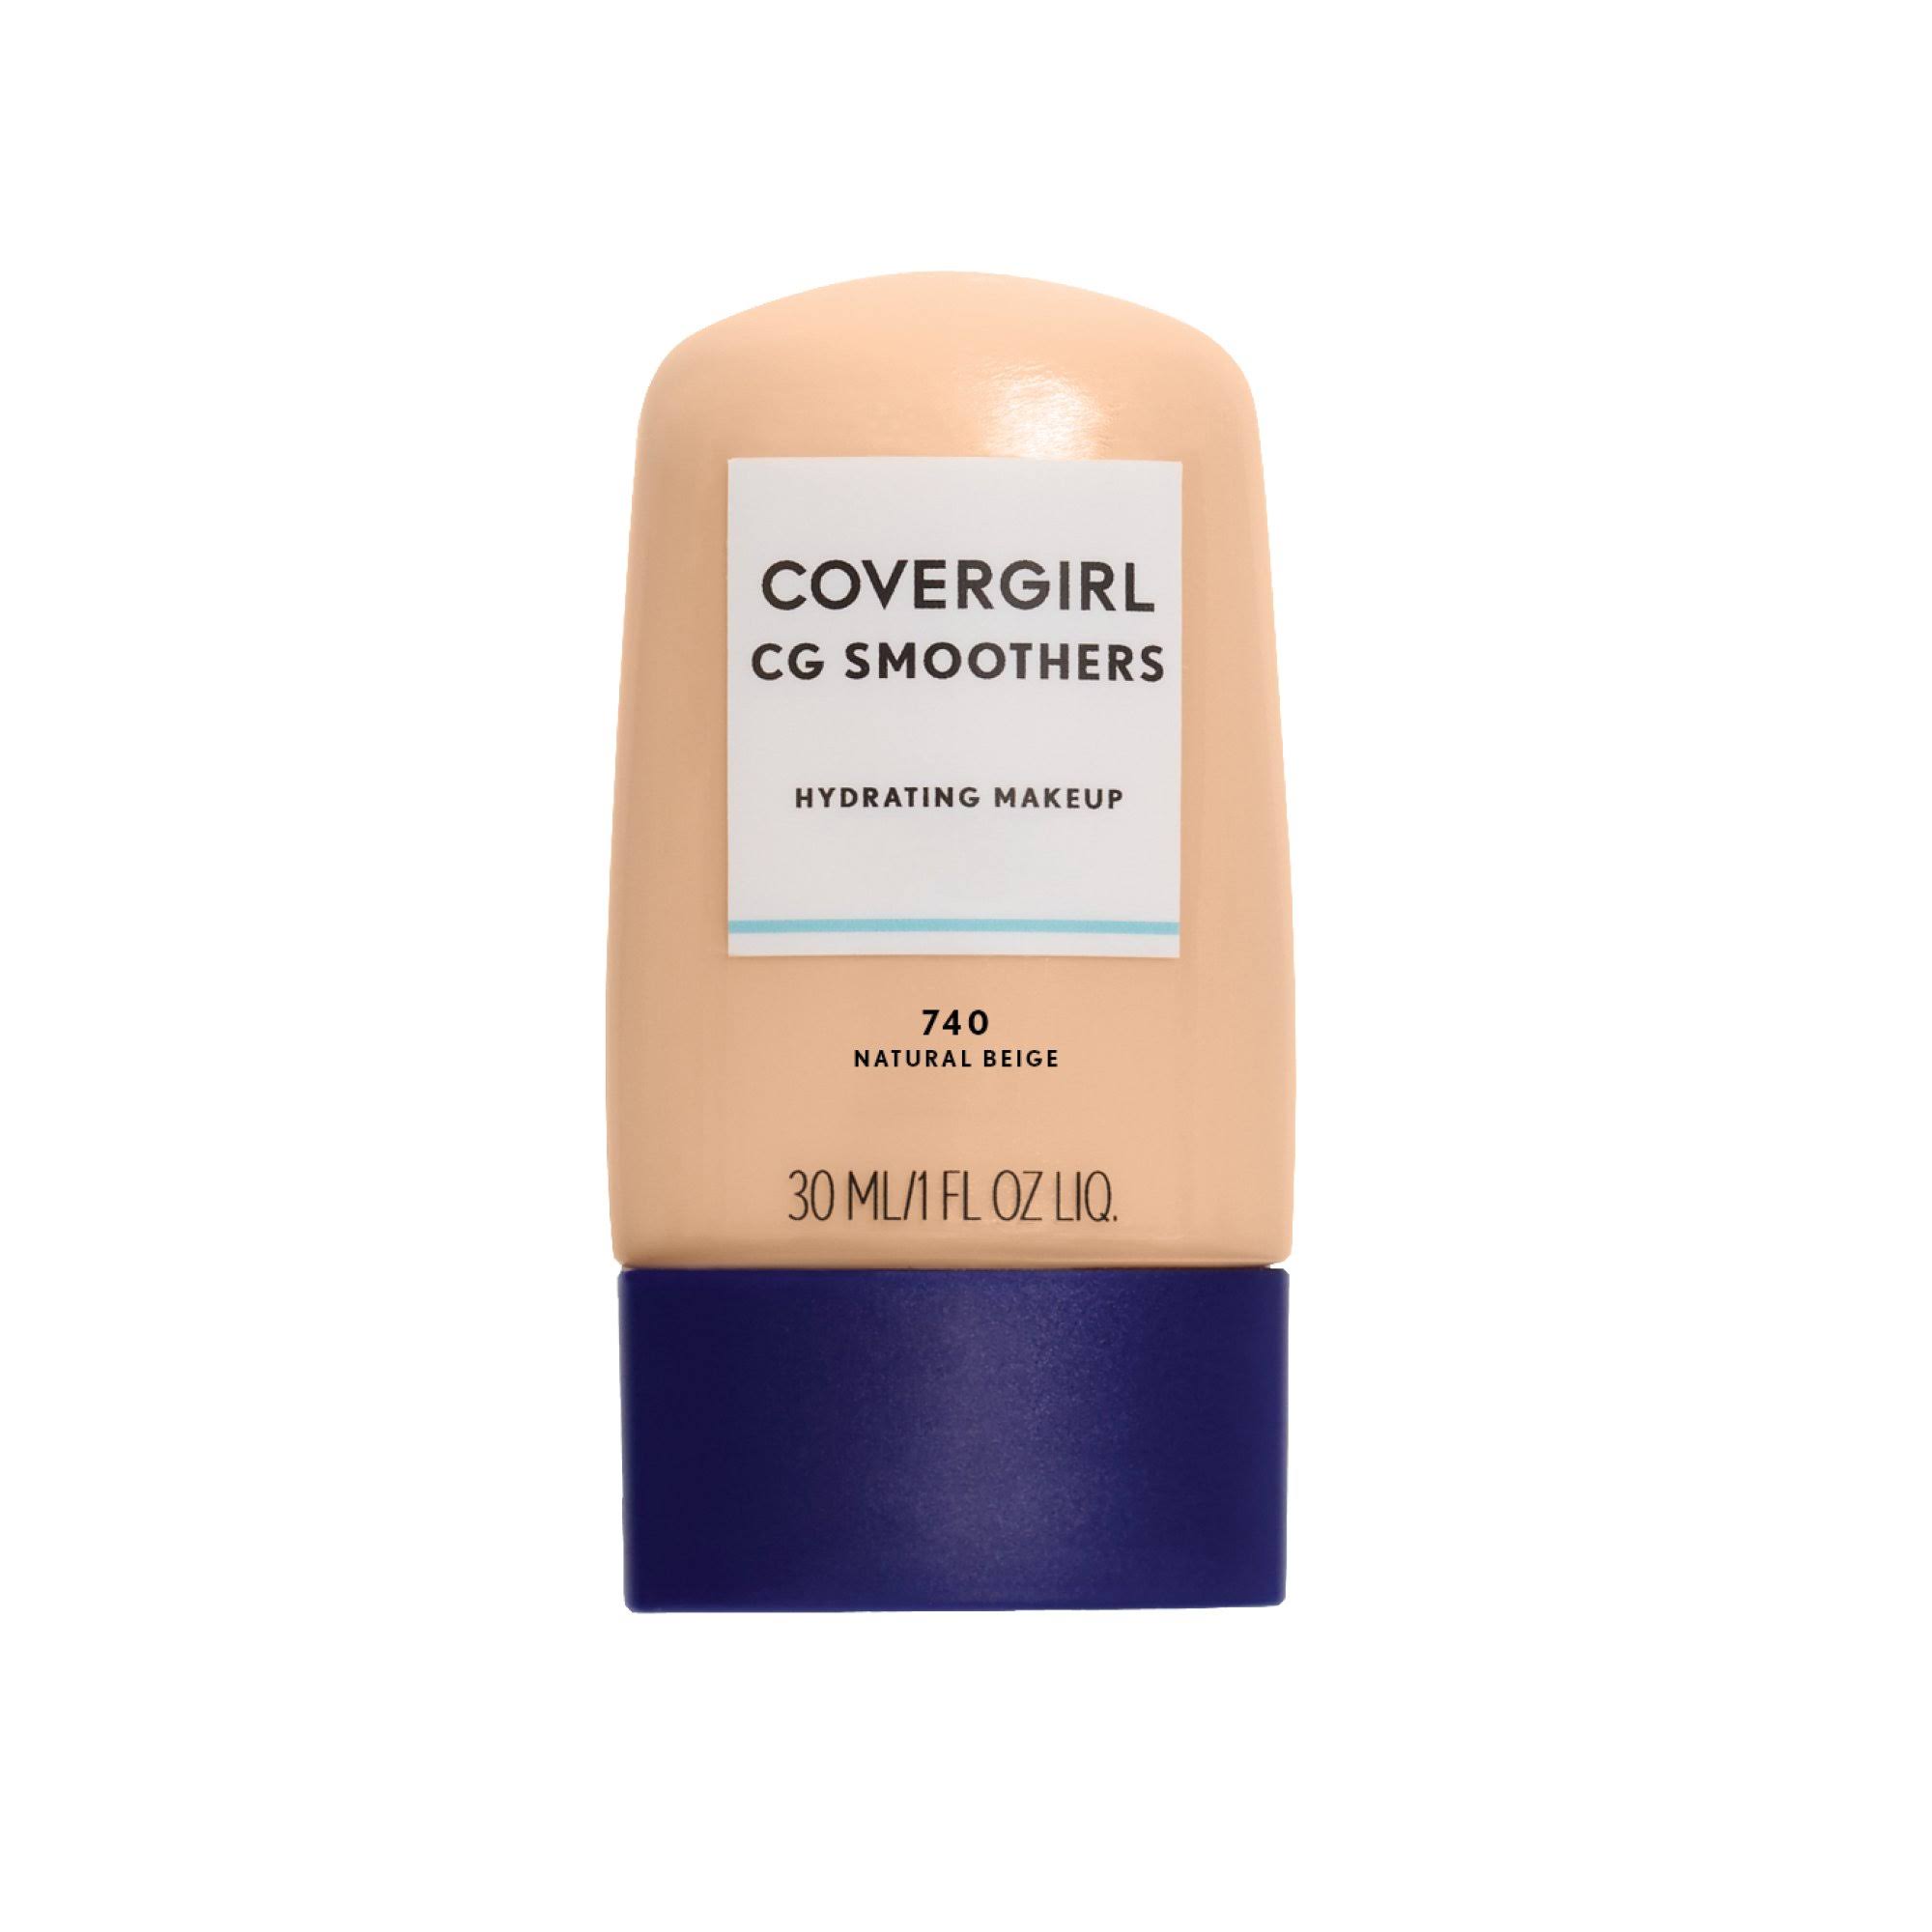 Covergirl Smoothers Hydrating Makeup 740 Natural Beige 1 fl oz (30 ml)